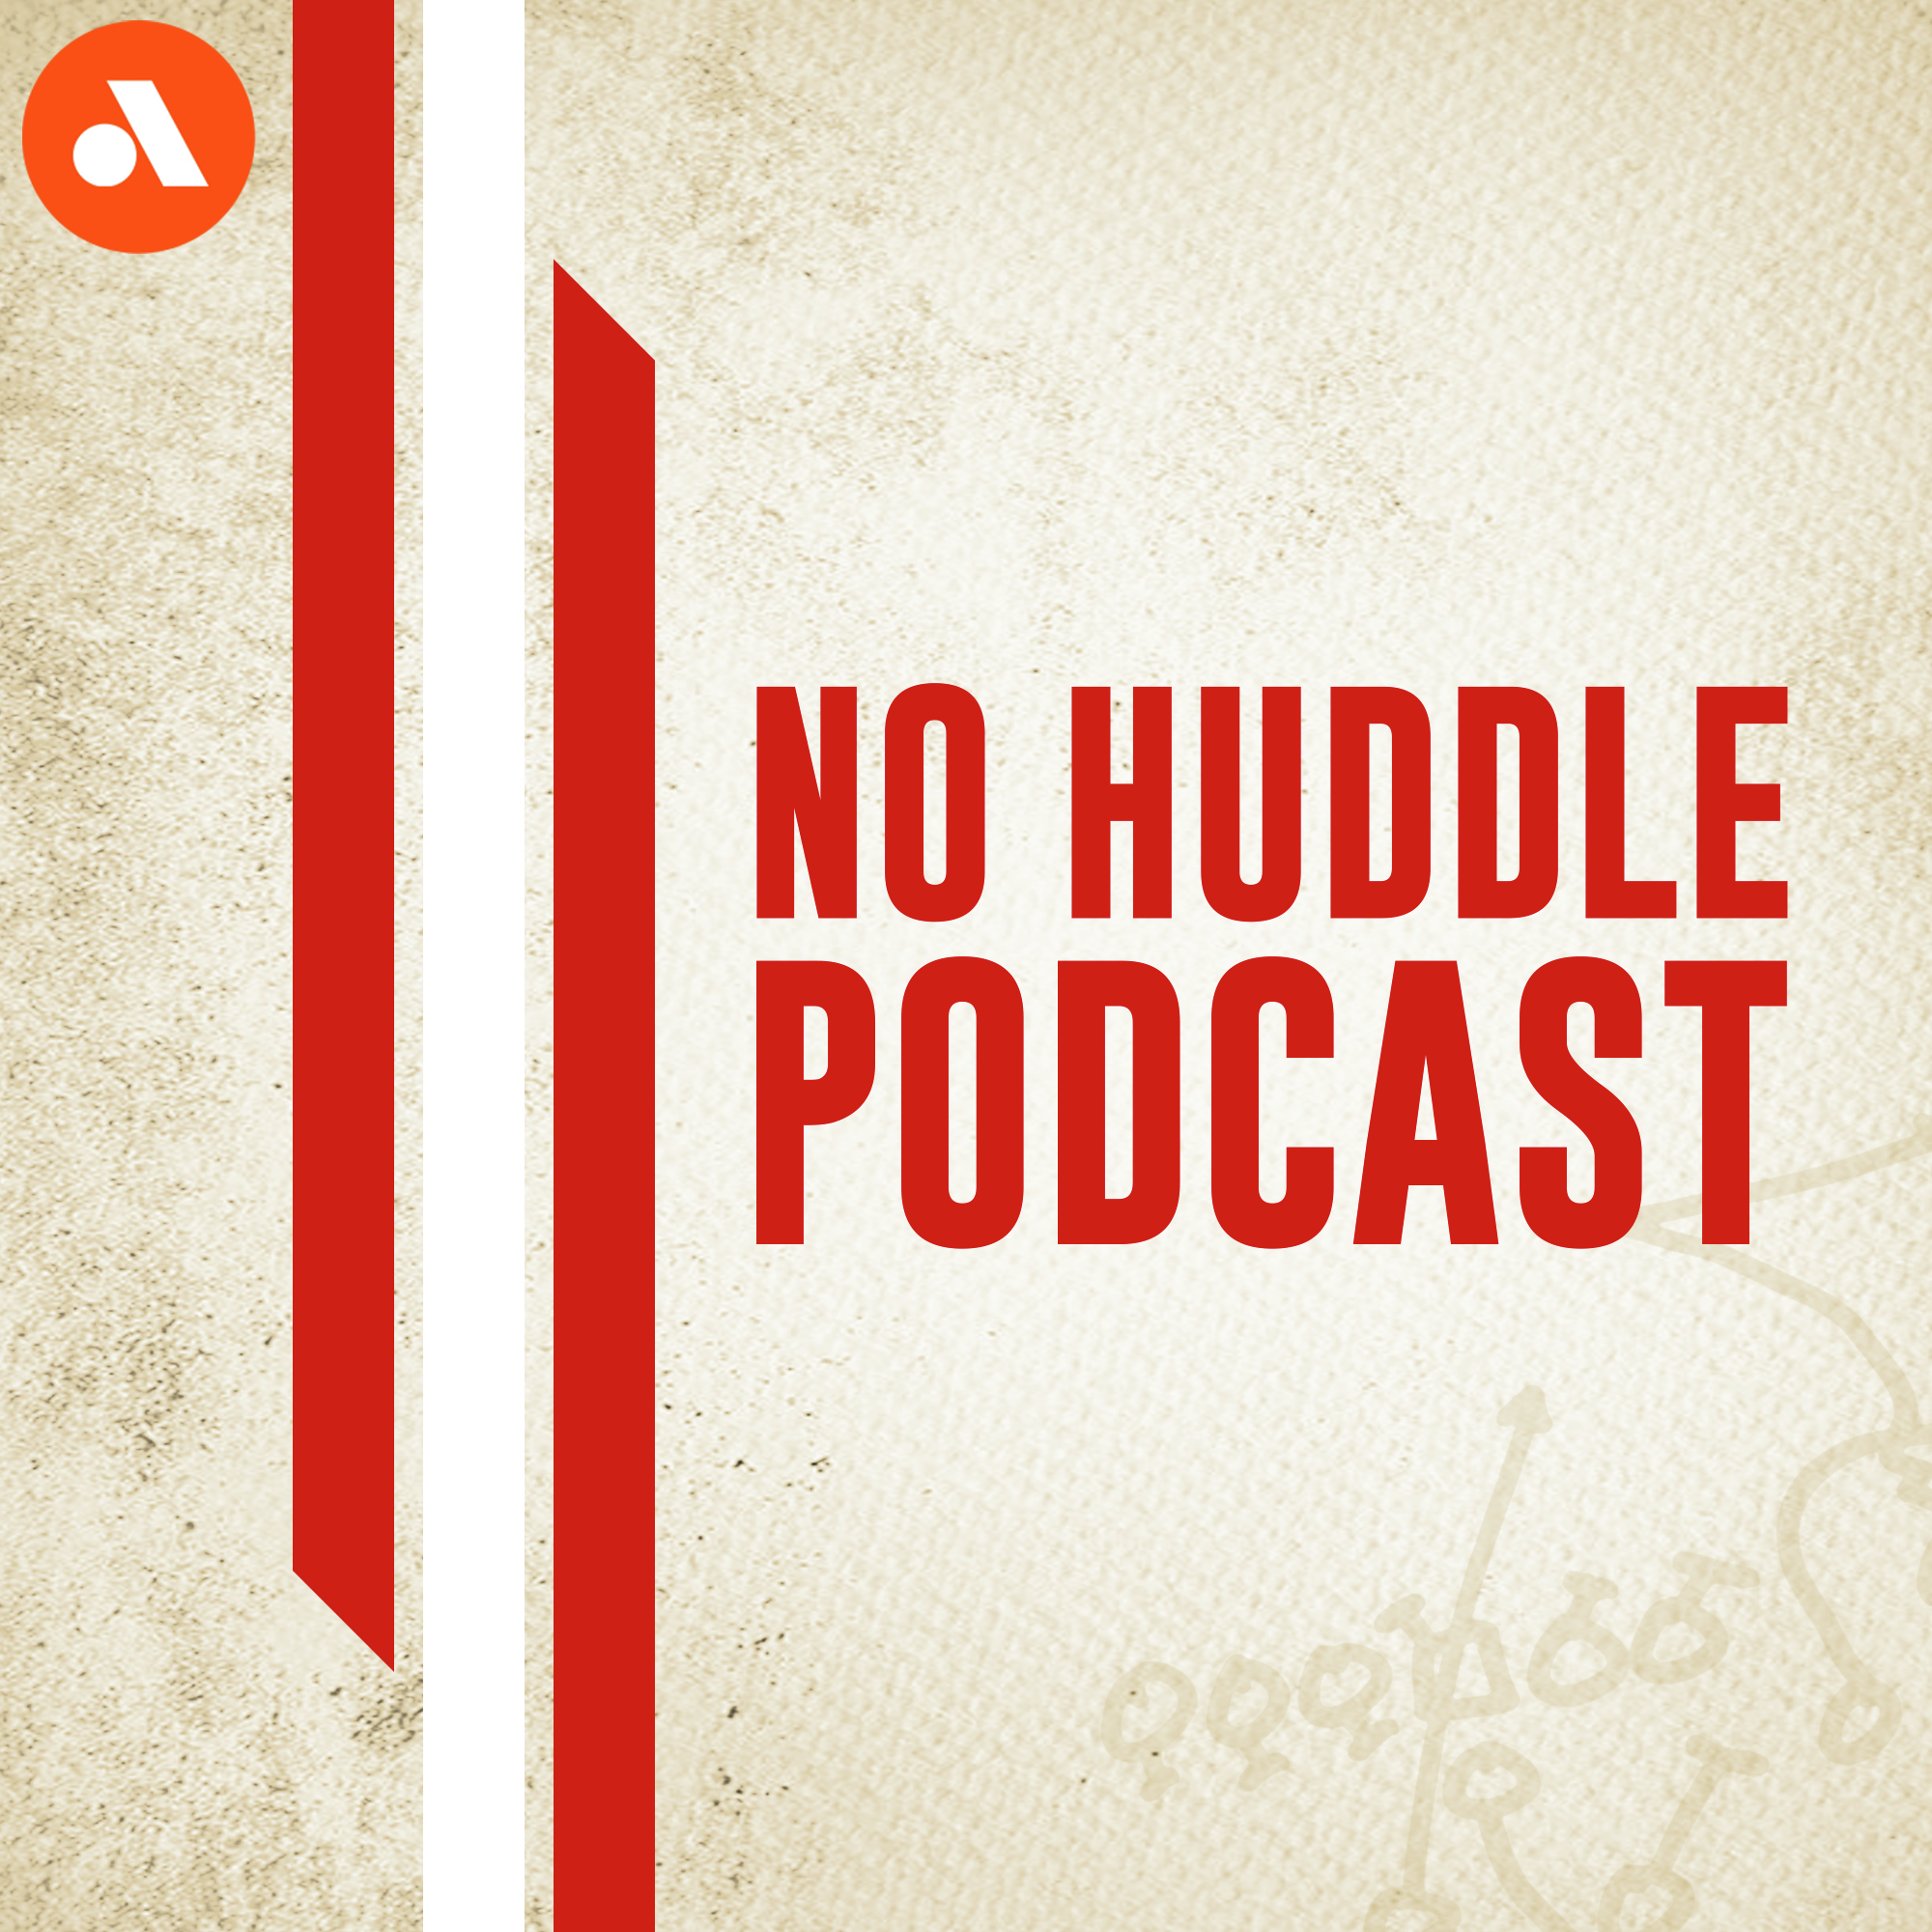 Who Makes The Cut? | 'No Huddle Podcast'